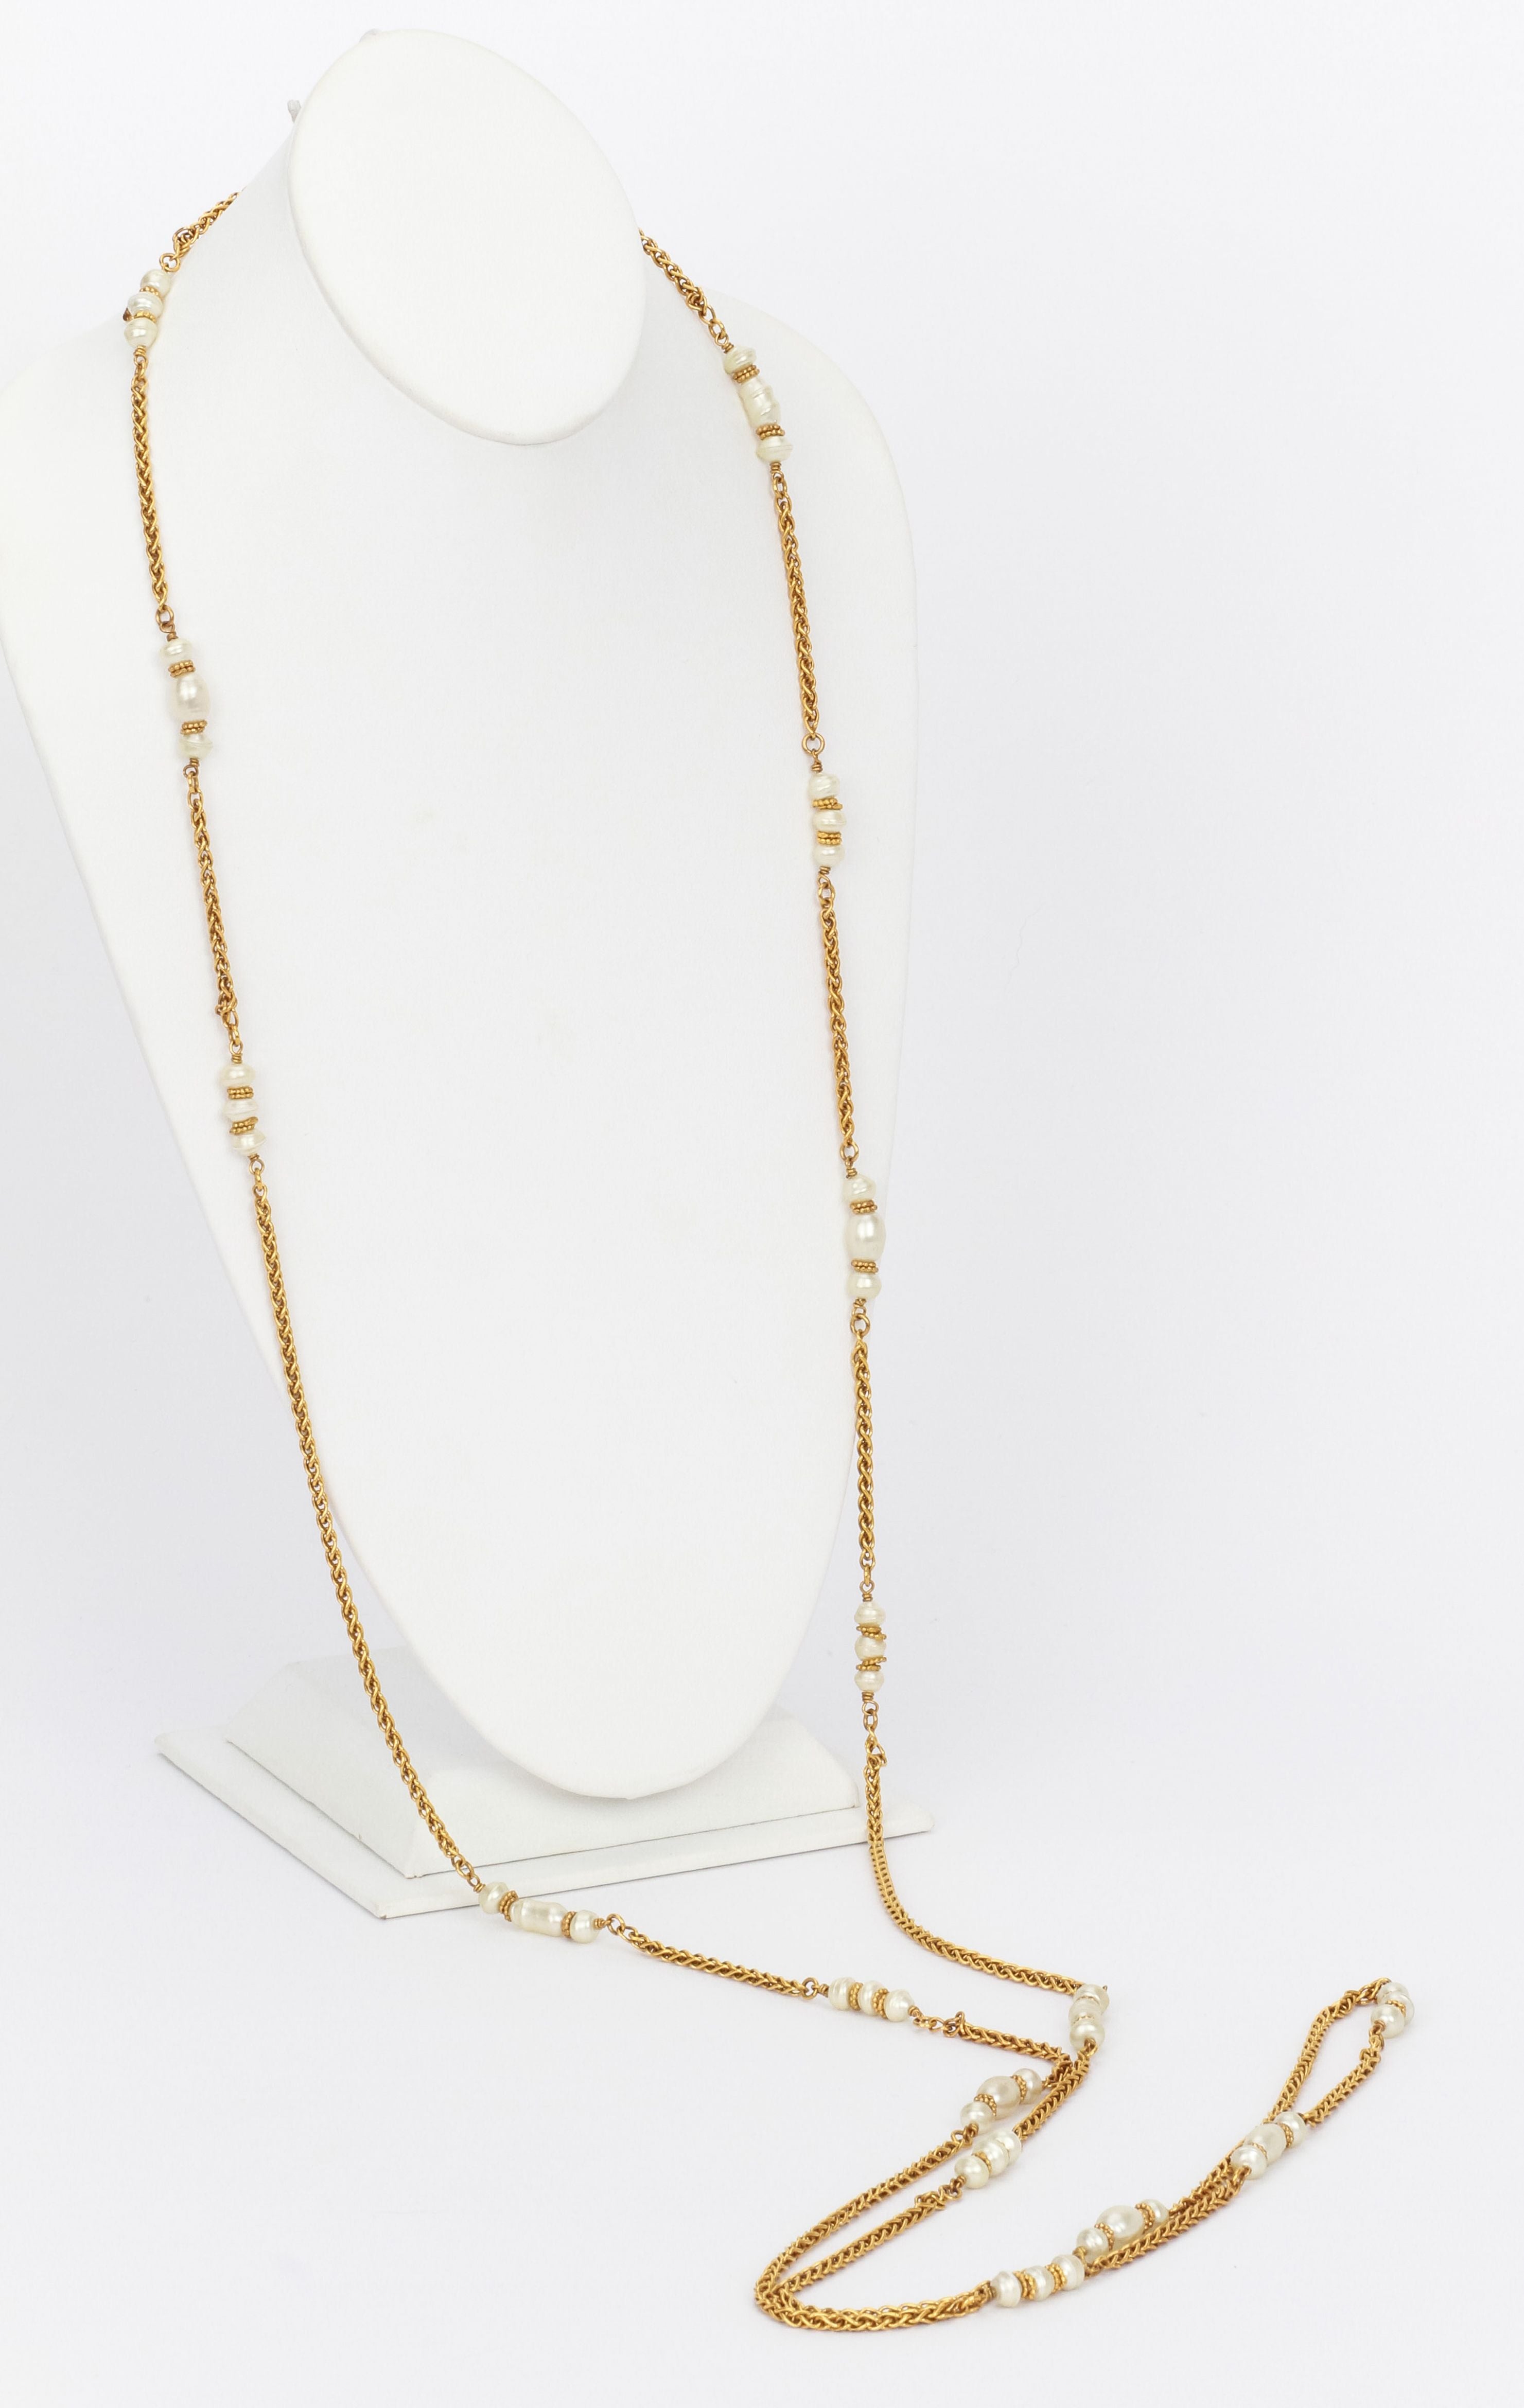 Chanel long sautoir gold pearls necklace - Vintage Lux